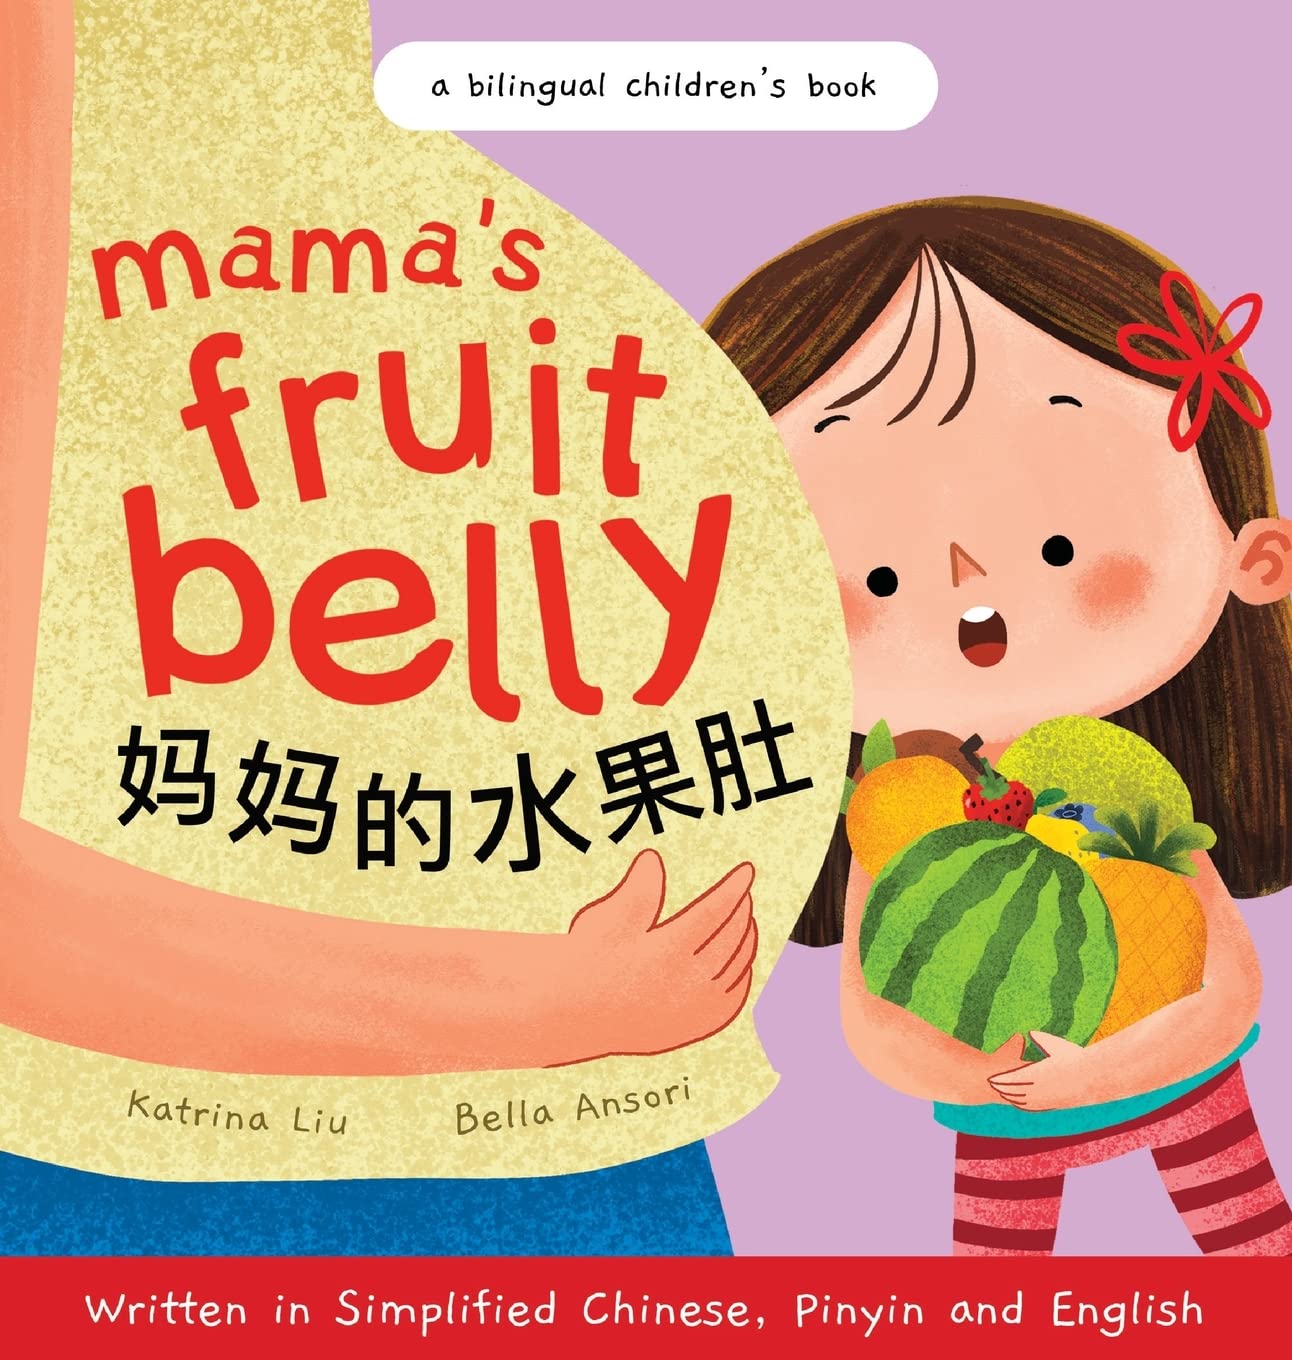 Mama's Fruit Belly - Written in Simplified Chinese, Pinyin, and English: A Bilingual Children's Book: Pregnancy and New Baby Anticipation Through the Eyes of a Child (Chinese Edition)